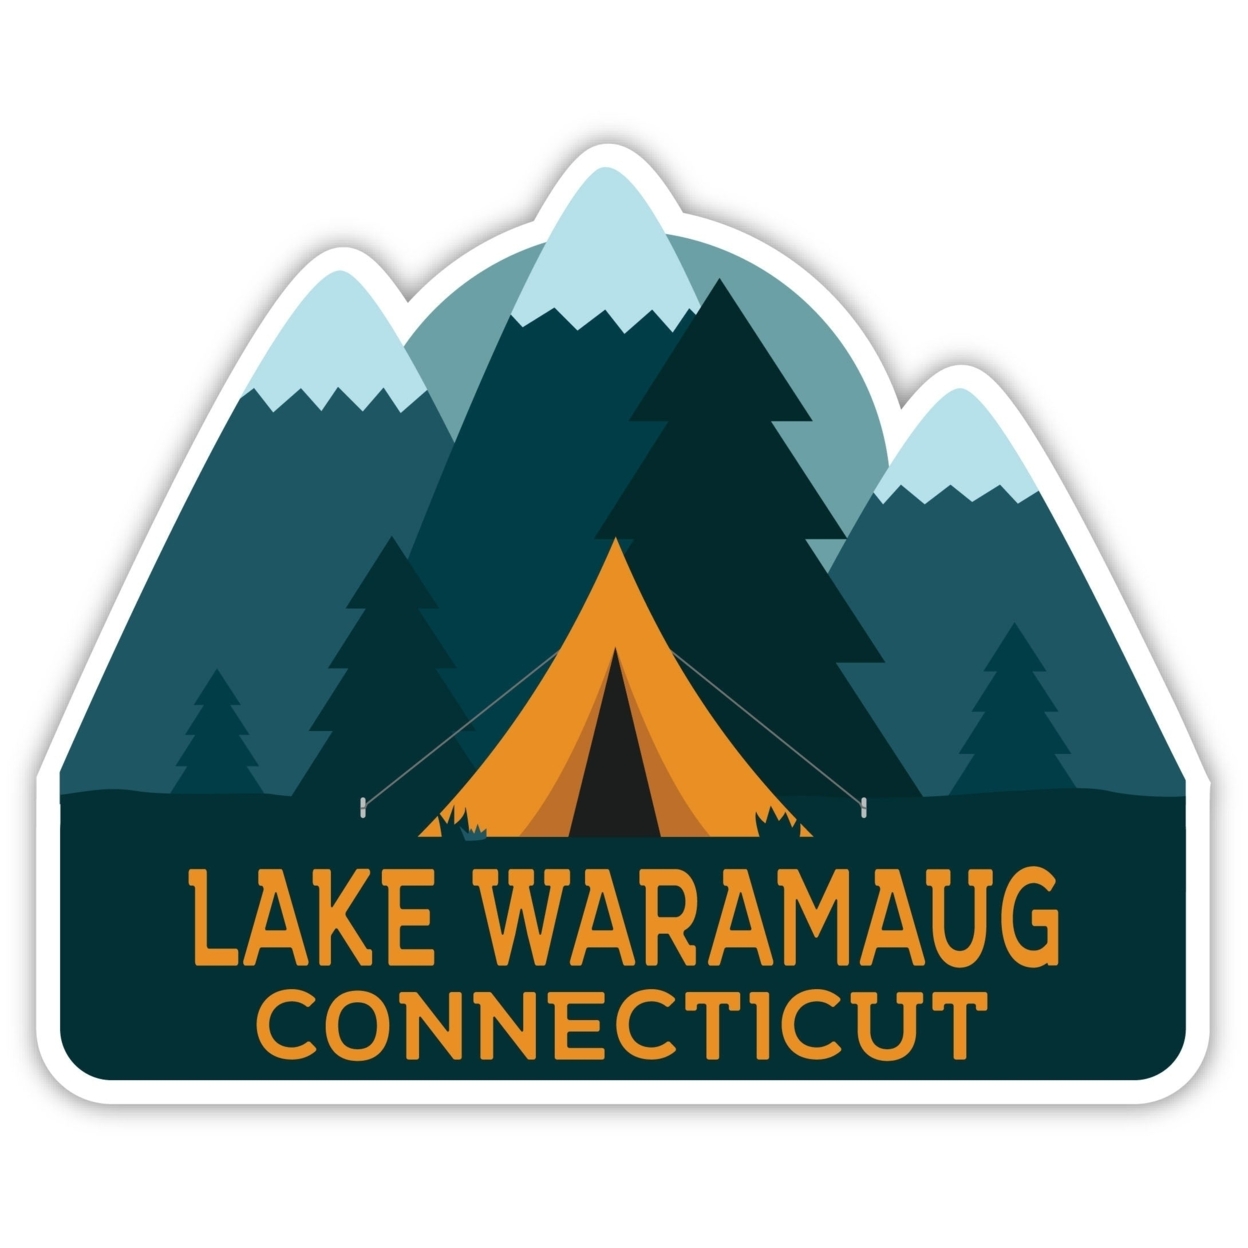 Lake Waramaug Connecticut Souvenir Decorative Stickers (Choose Theme And Size) - 4-Inch, Tent